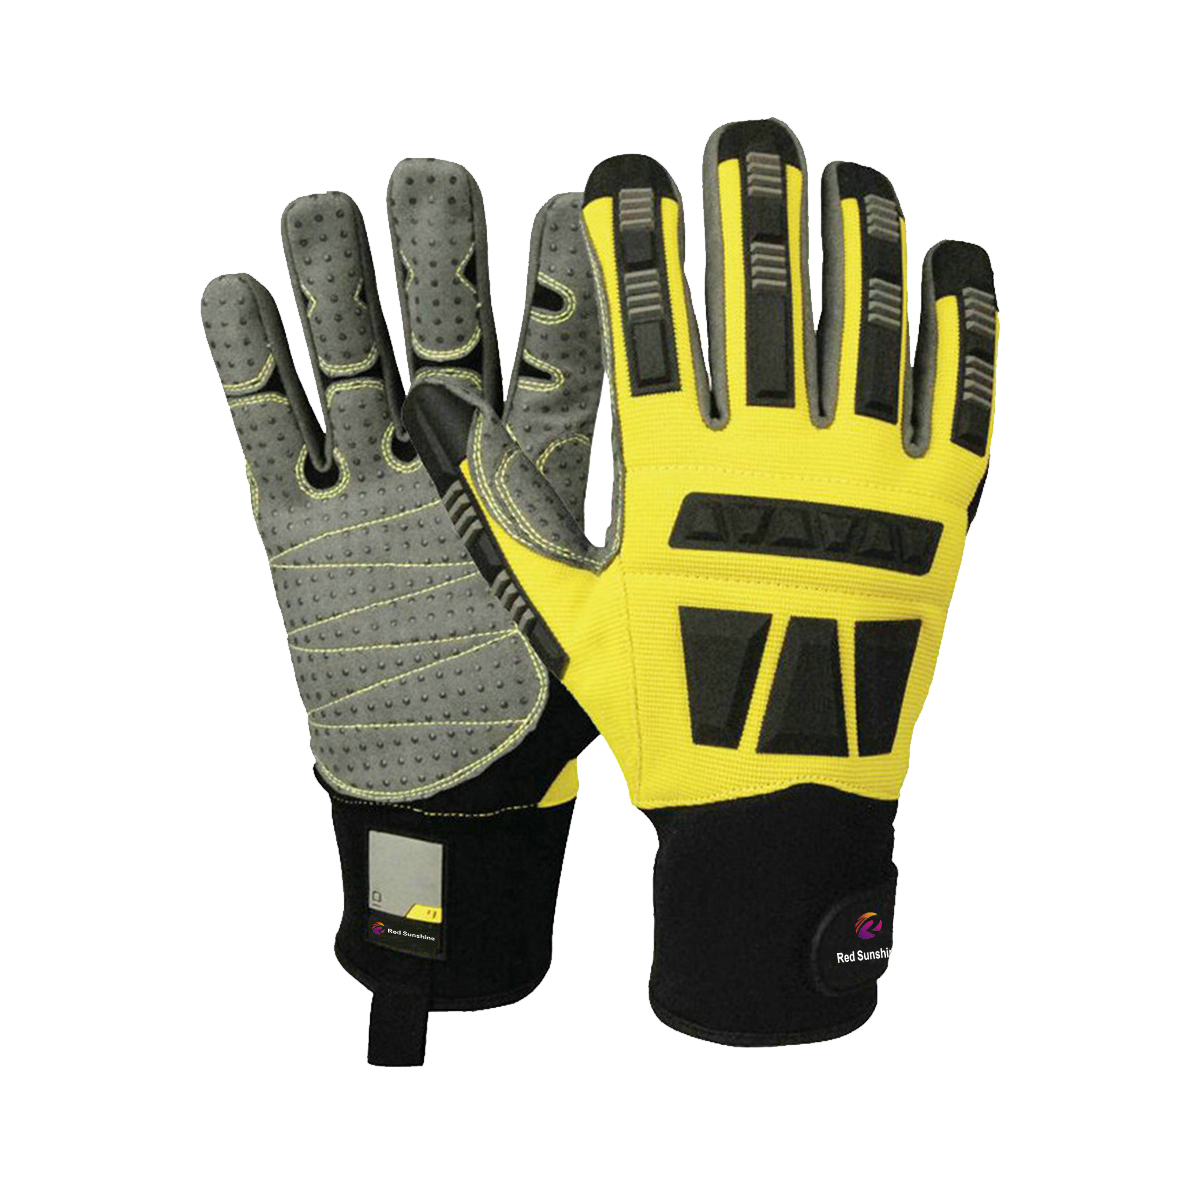 Extrication Gloves / Technical Rescue Gloves / structural firefighting impact TPR gloves